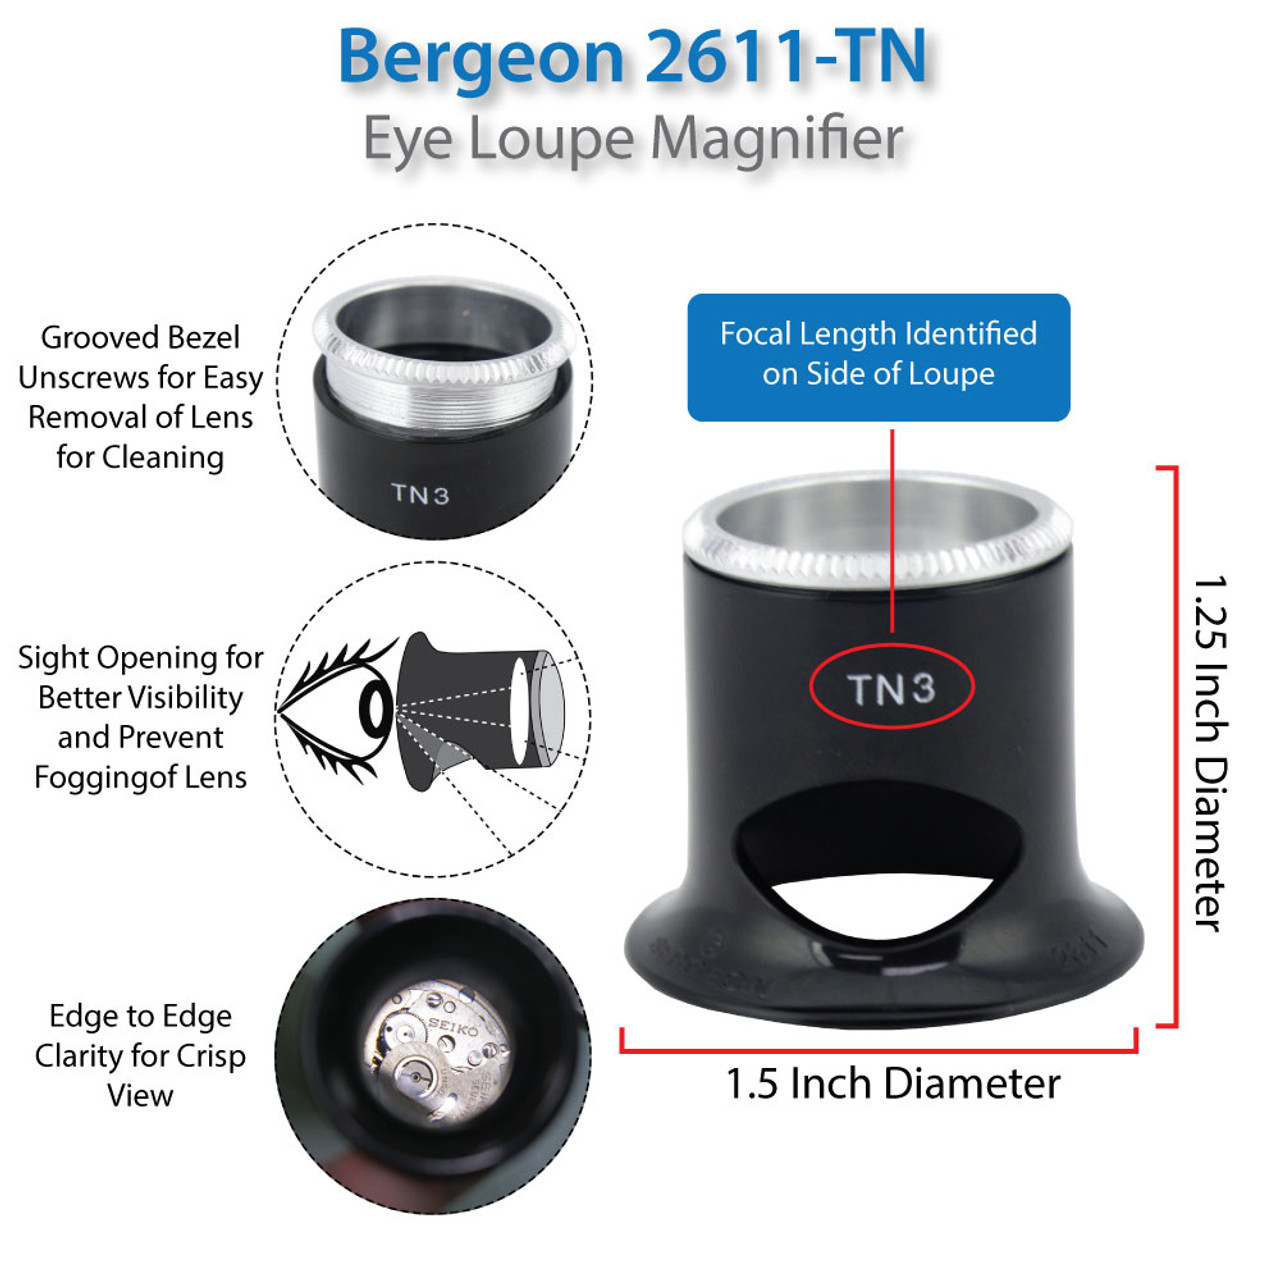 Bergeon 2611-TN Jewelers Eye Loupe Magnifier with Opening